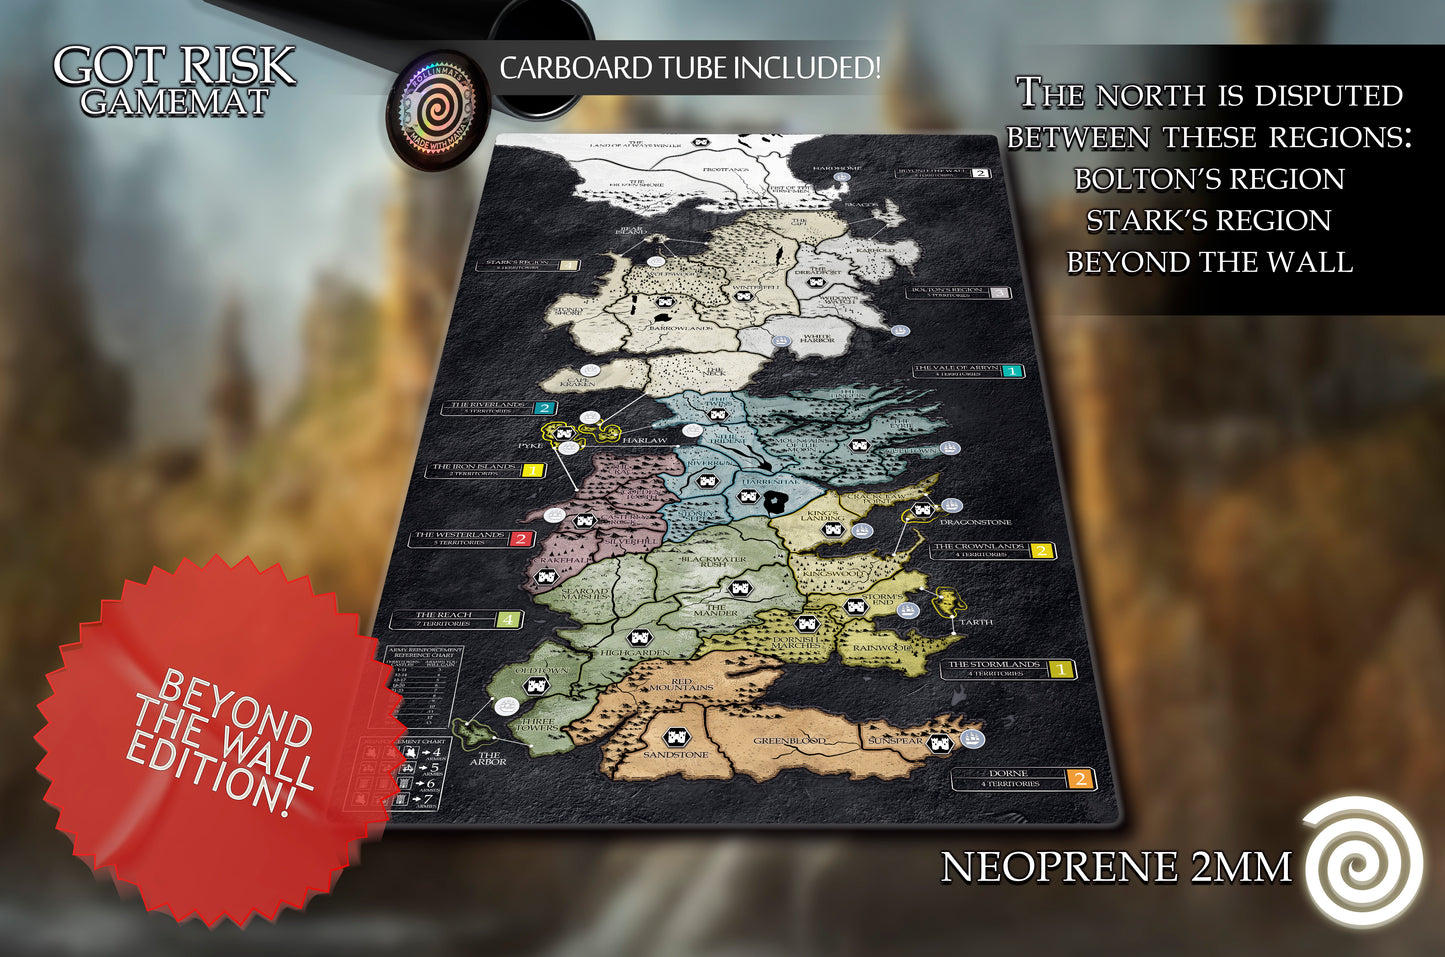 RISK: Game Of Thrones compatible Gamemats